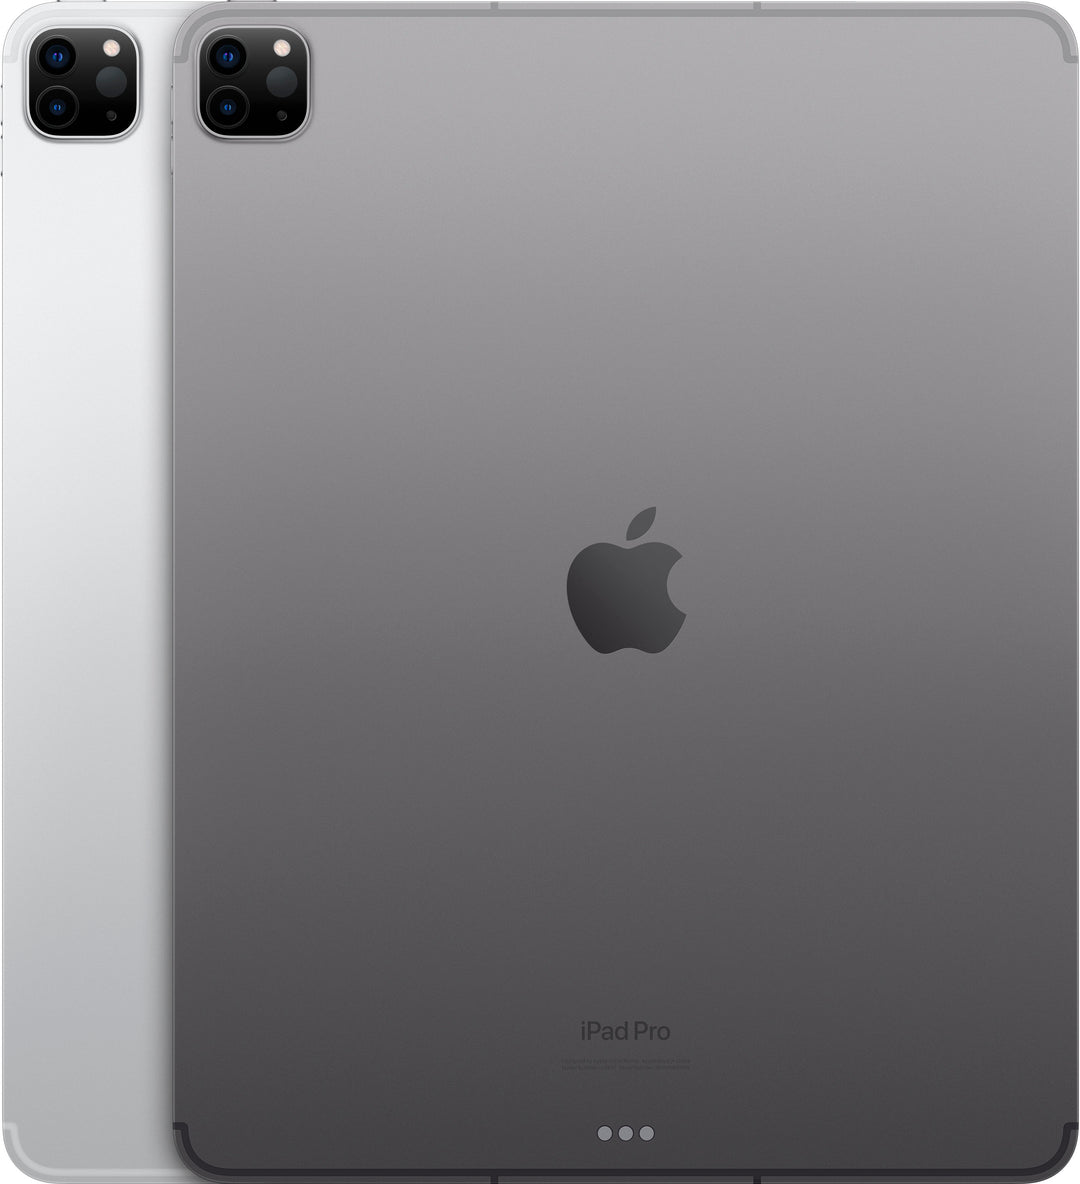 Apple - 12.9-Inch iPad Pro (Latest Model) with Wi-Fi + Cellular - 256GB - Space Gray (AT&T)_3